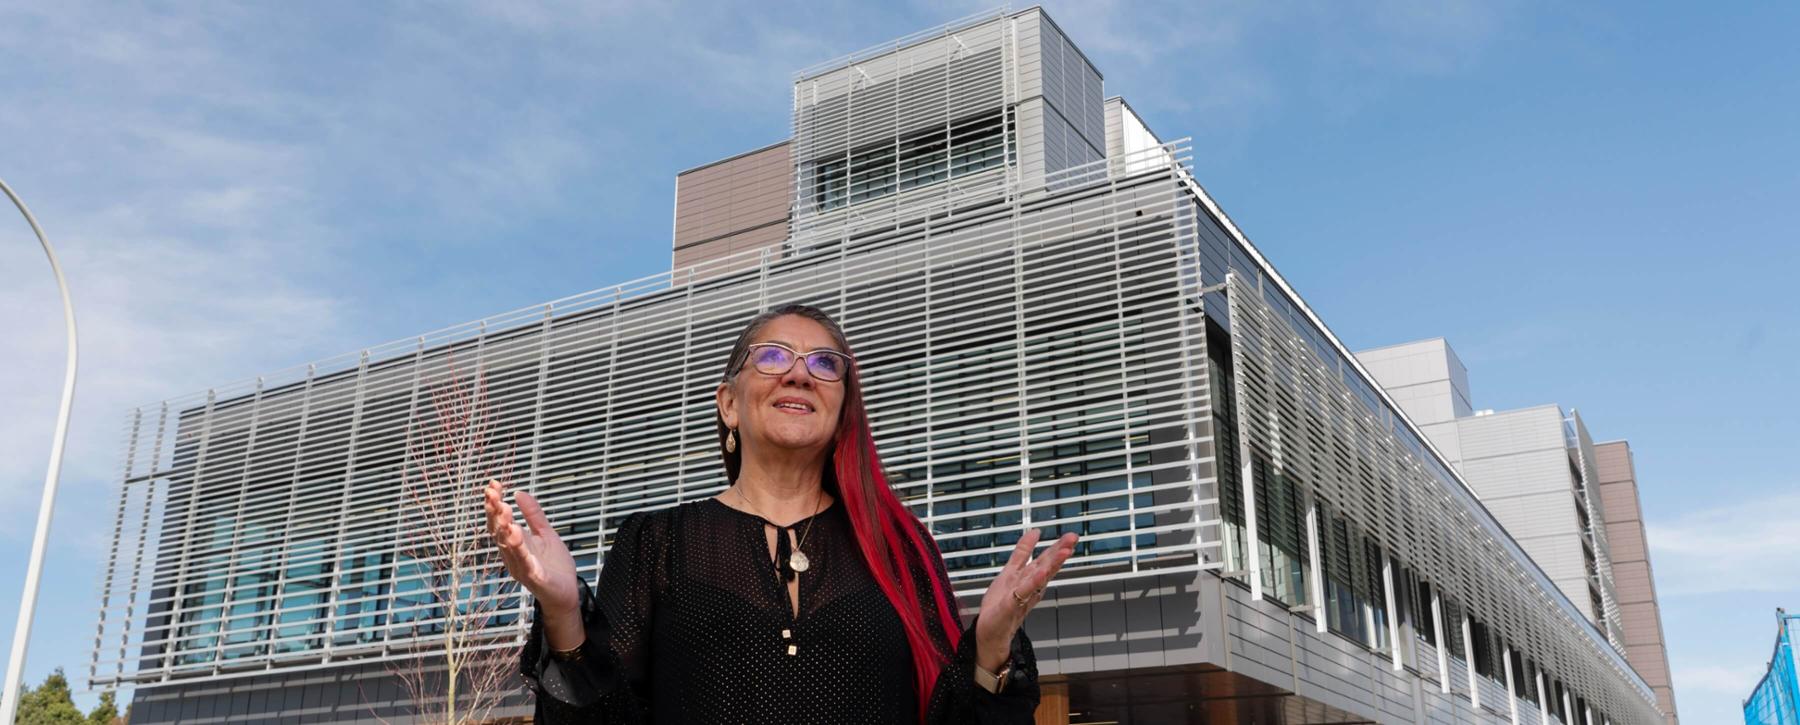 VPI Robina Thomas stands in front of new student residence building one.